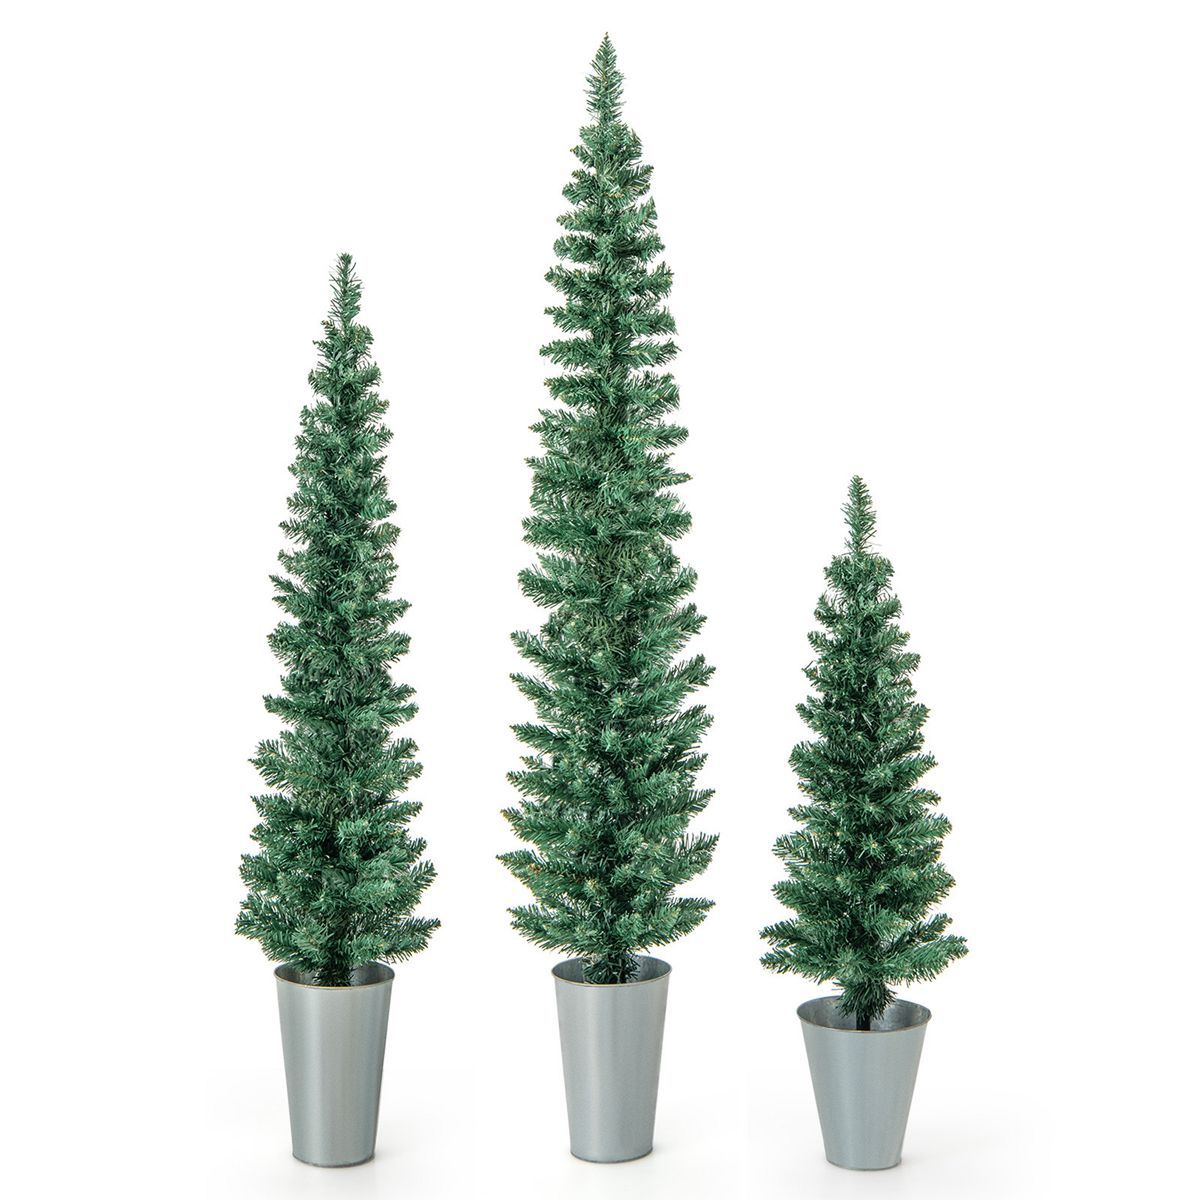 Costway Potted Artificial Christmas Tree Set of 3 with 3/4/5 FT Faux Slim Pencil Trees | Target